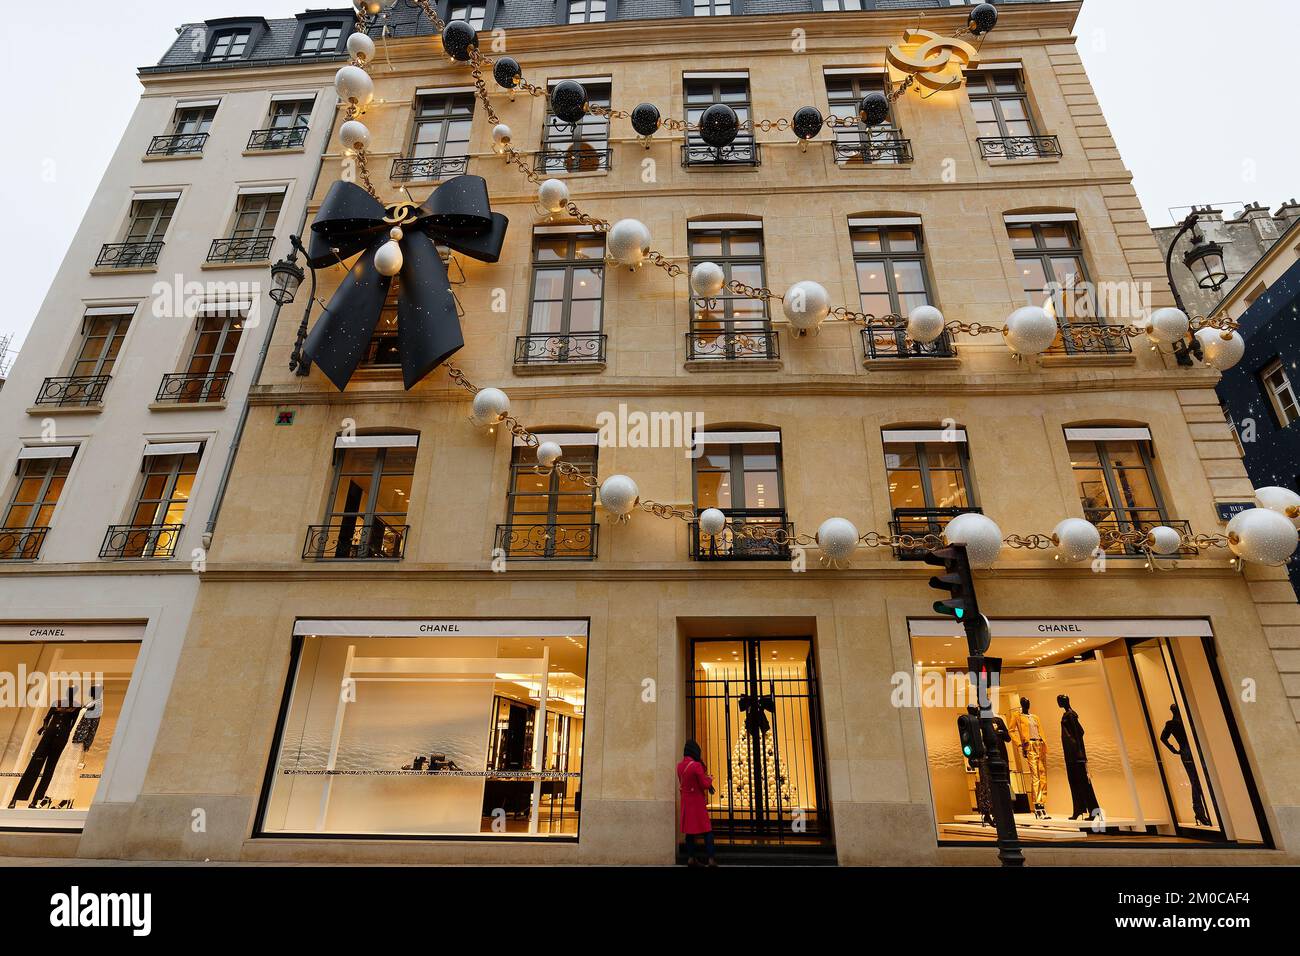 Chanel Fashion Luxury Store In Paris France Stock Photo - Download Image Now  - Chanel - Designer Label, Paris - France, Advertisement - iStock